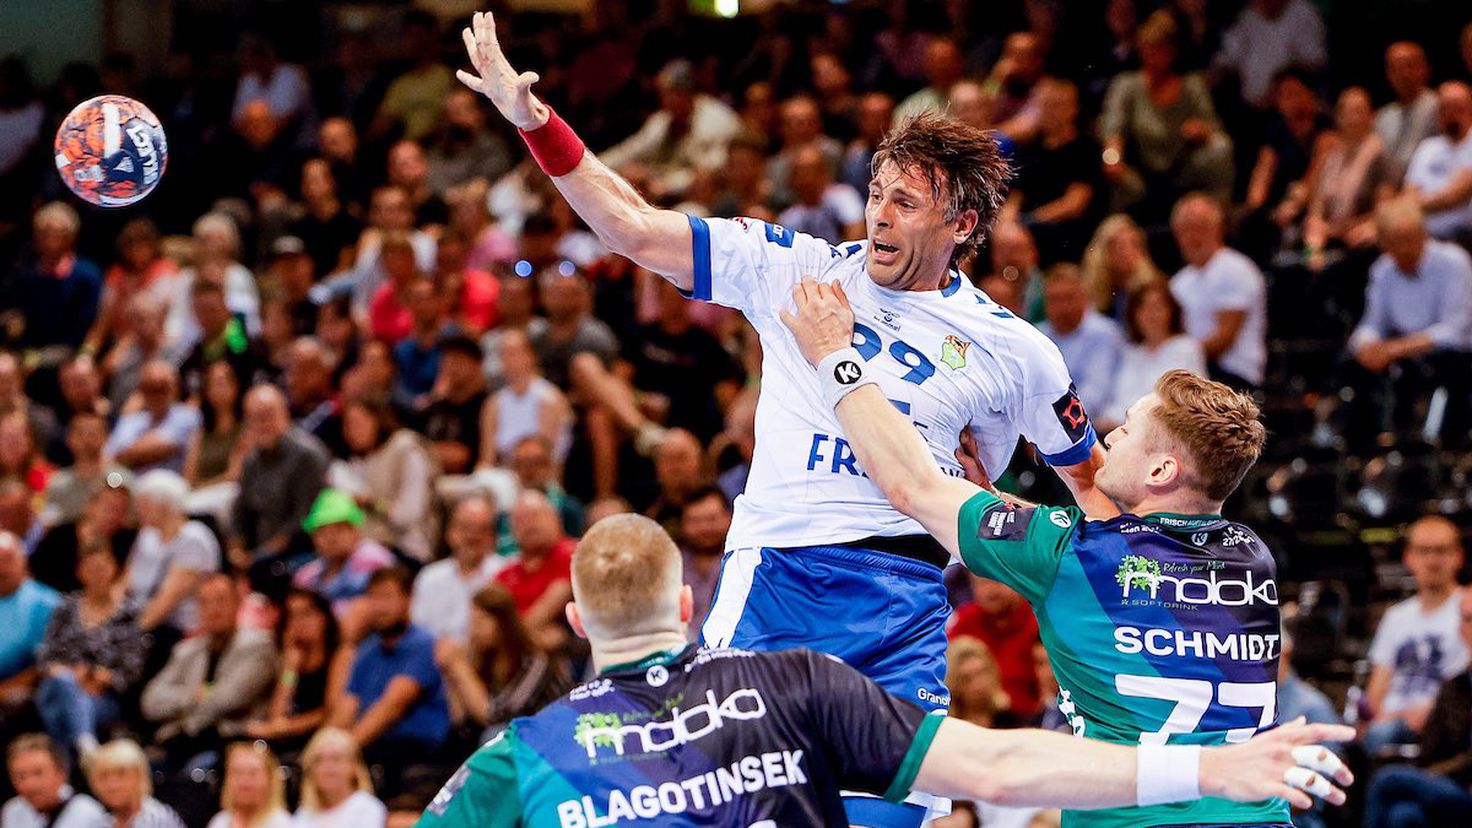 Granollers - Fuchse Berlin: TV, schedule and how to watch the final of the EHF European League online today
